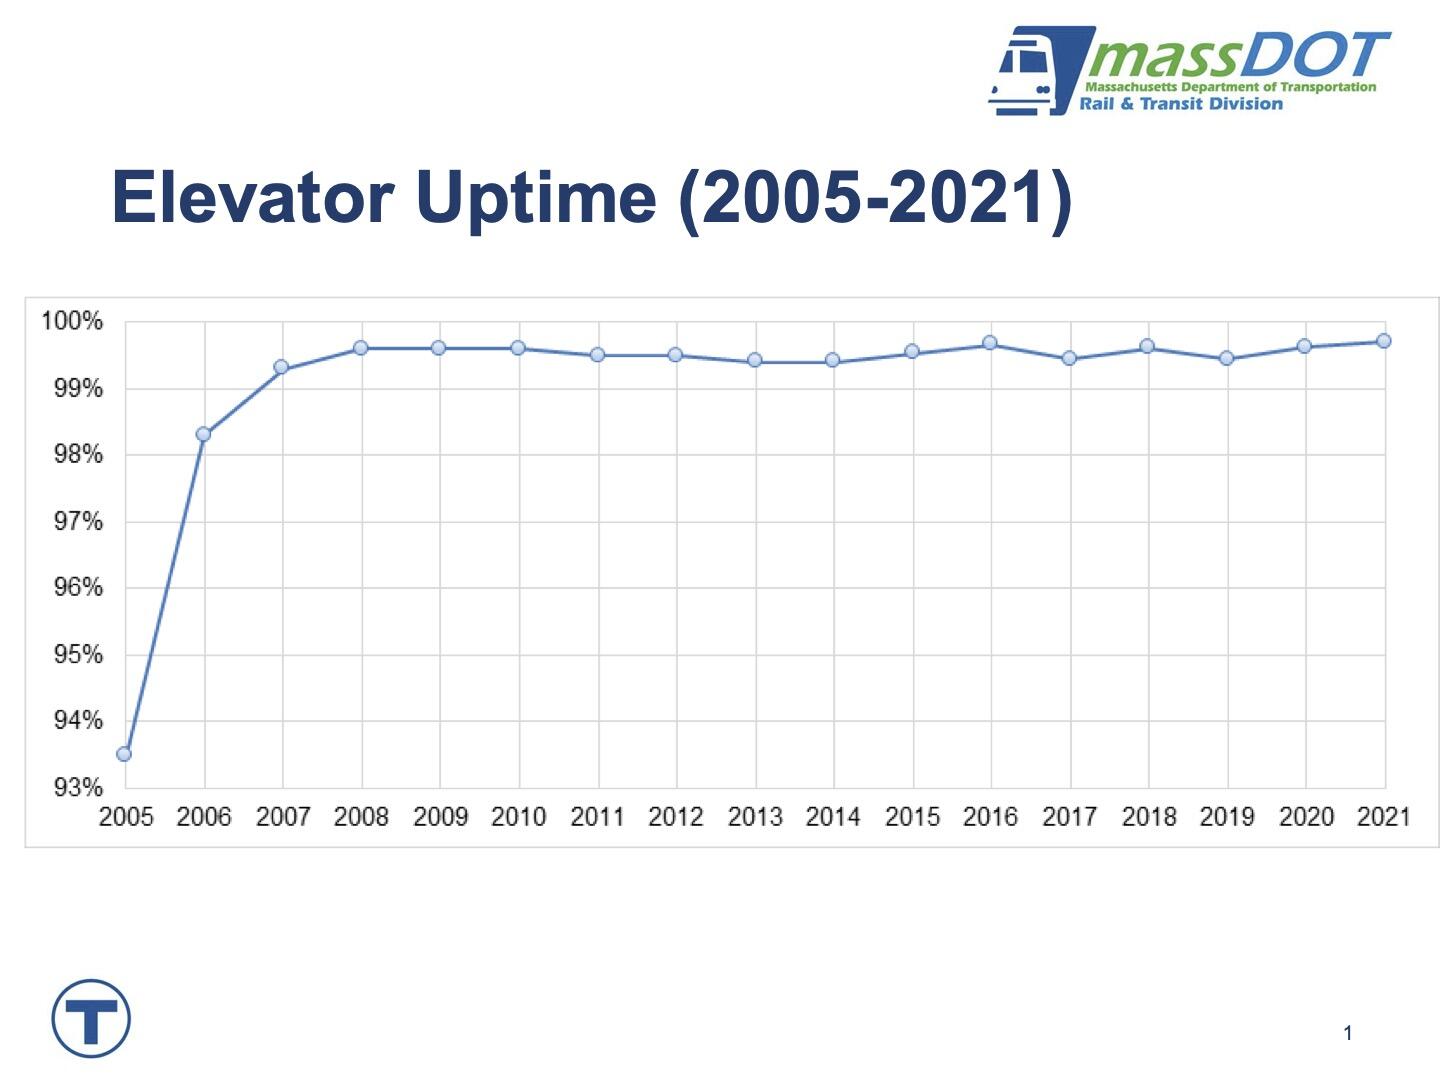 Graph of average system-wide elevator uptime from 2005 to 2021. 